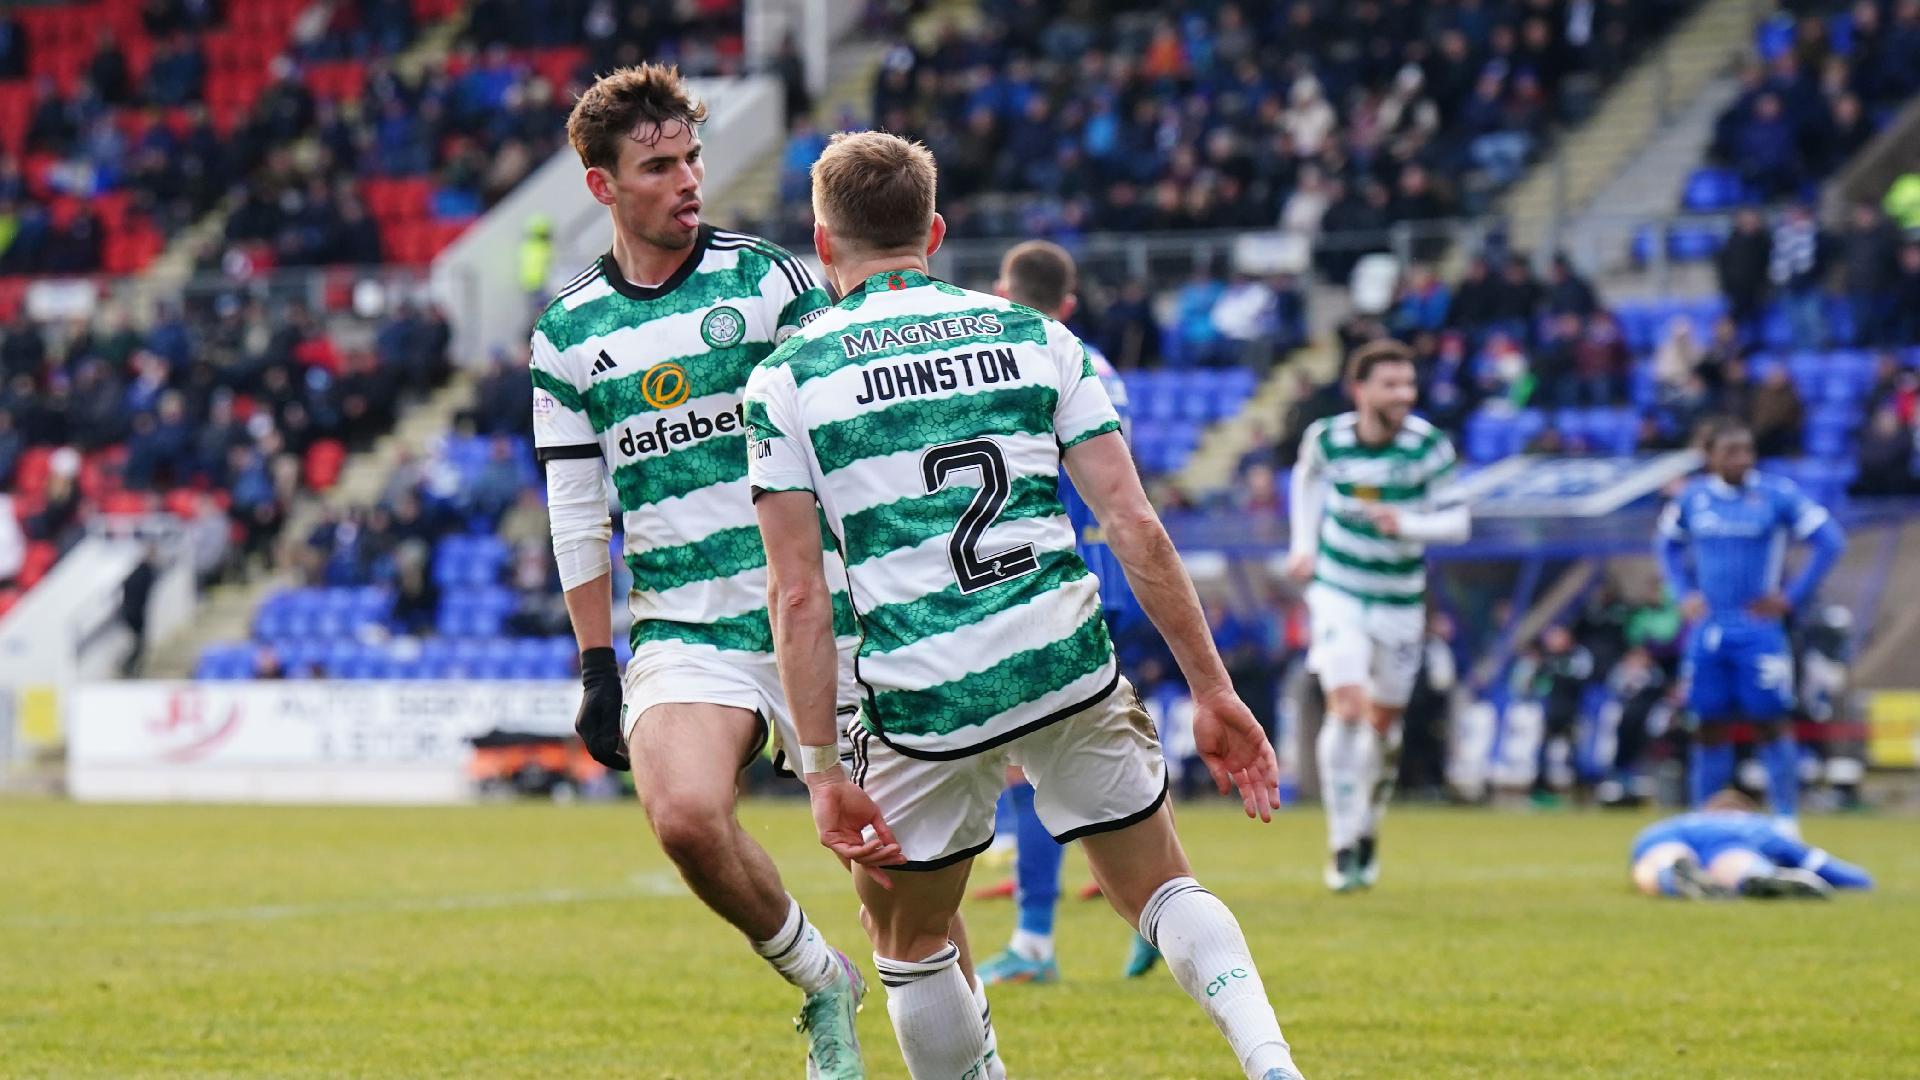 Celtic come from behind to secure victory at St Johnstone